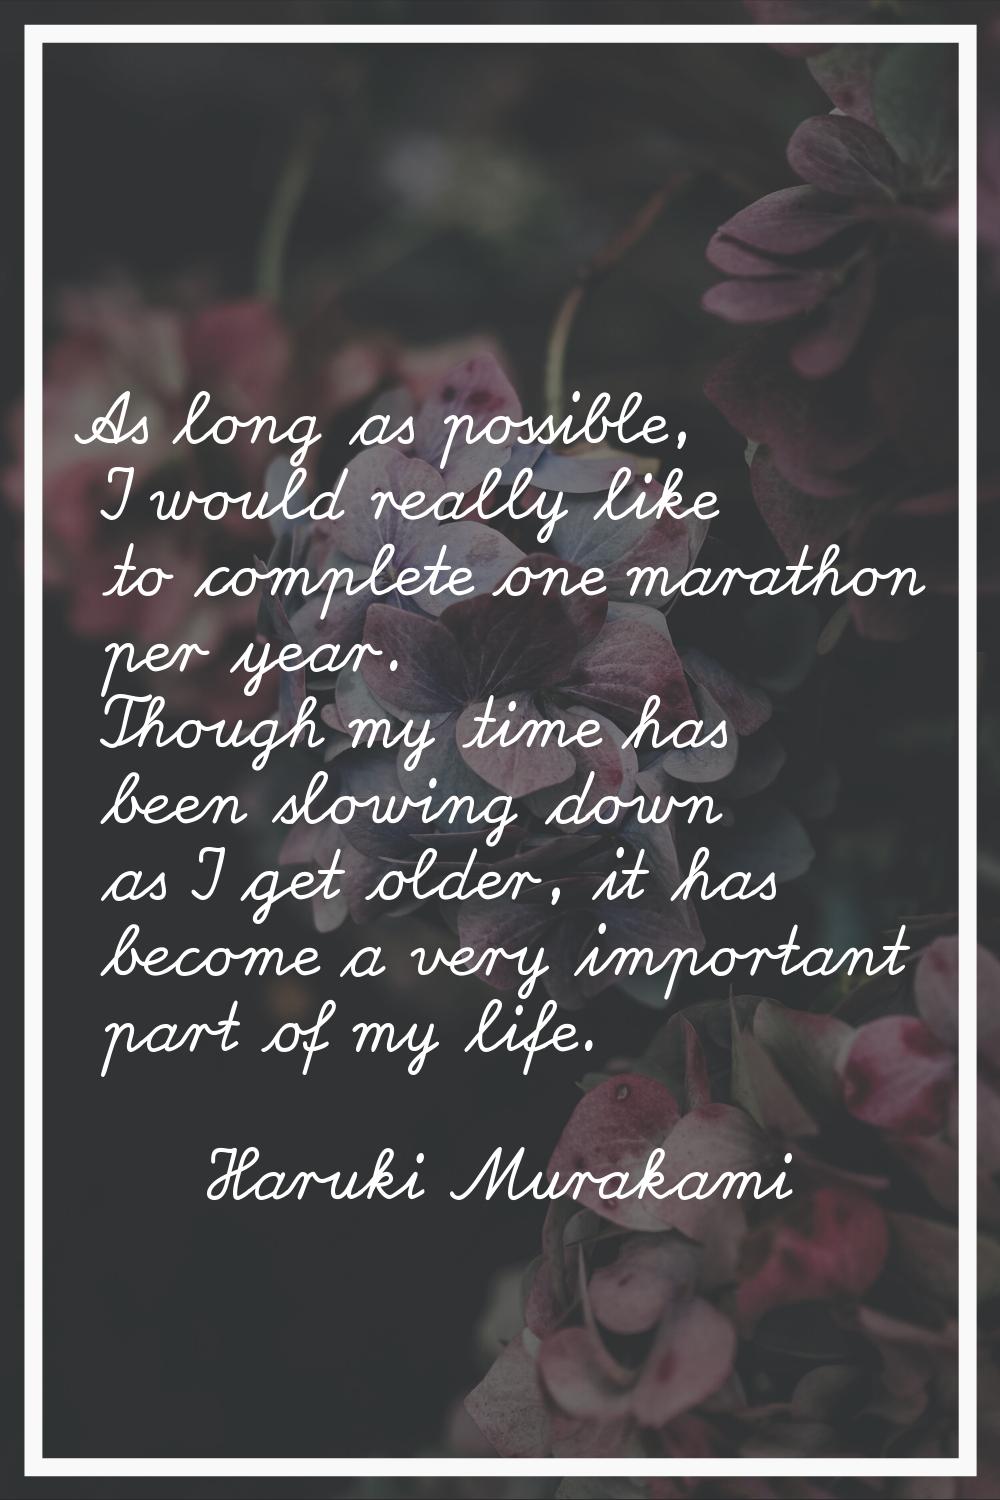 As long as possible, I would really like to complete one marathon per year. Though my time has been